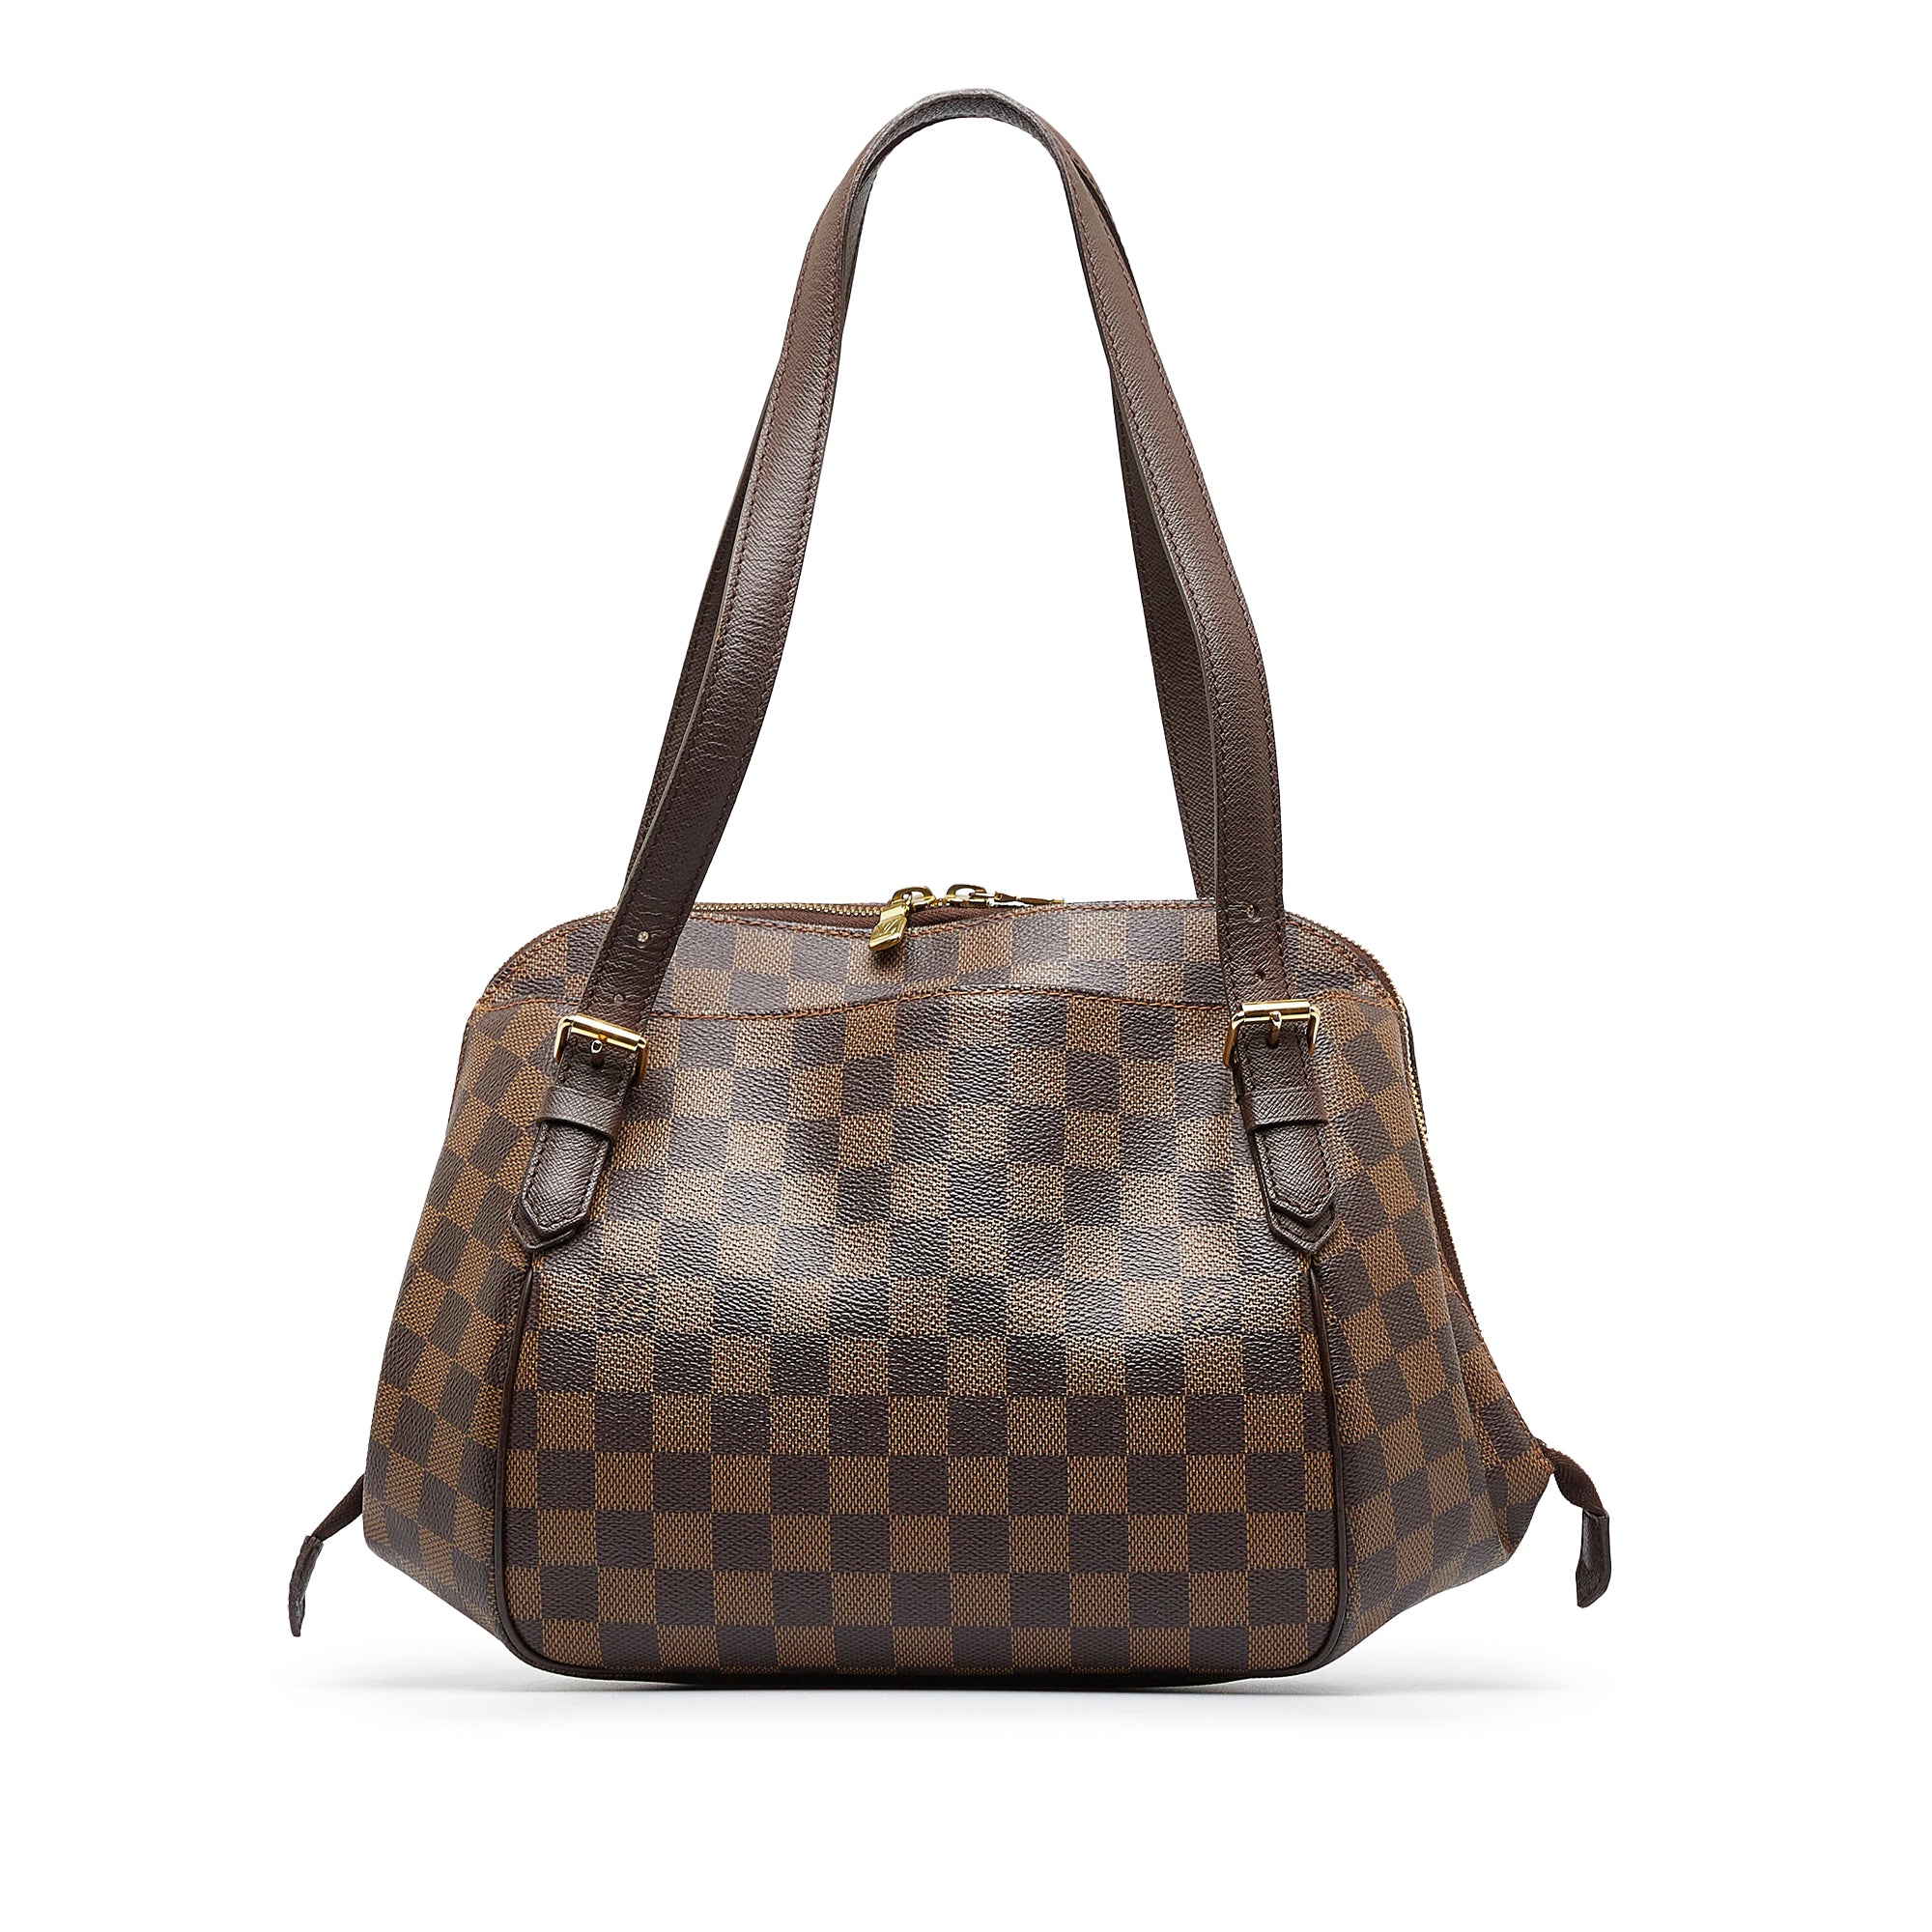 Shop for Louis Vuitton Damier Ebene Canvas Leather Belem MM Bag - Shipped  from USA